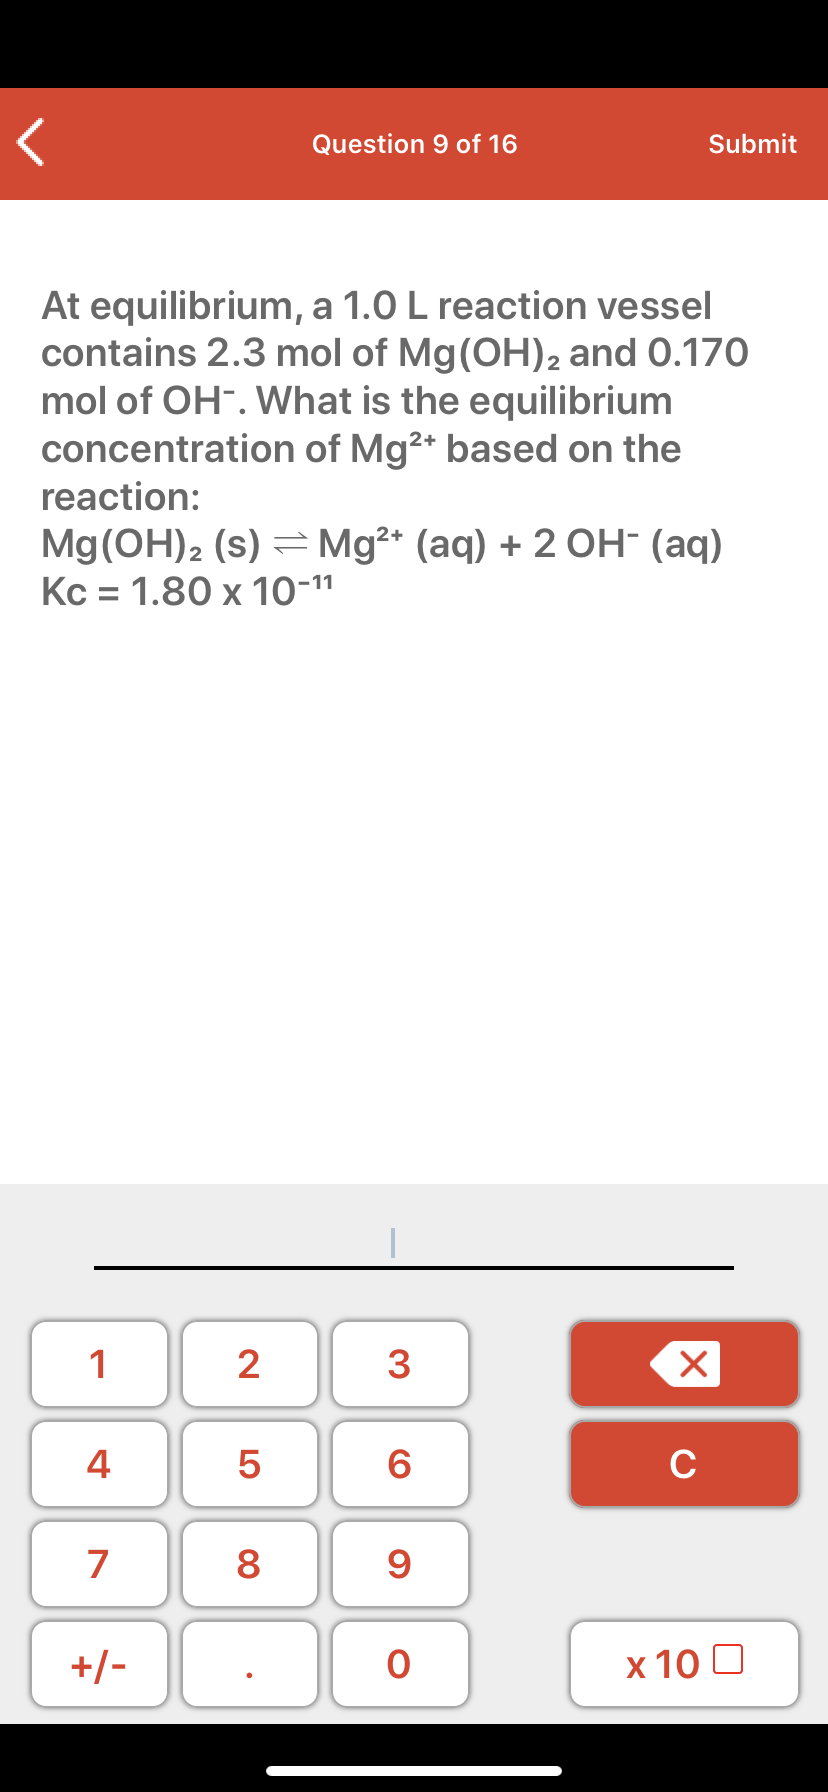 At equilibrium, a 1.0 L reaction vessel
contains 2.3 mol of Mg(OH)2 and 0.170
mol of OH-. What is the equilibrium
concentration of Mg2+ based on the
reaction:
Mg(OH)2 (s) = Mg²* (aq) + 2 OH- (aq)
Kc = 1.80 x 10-11
